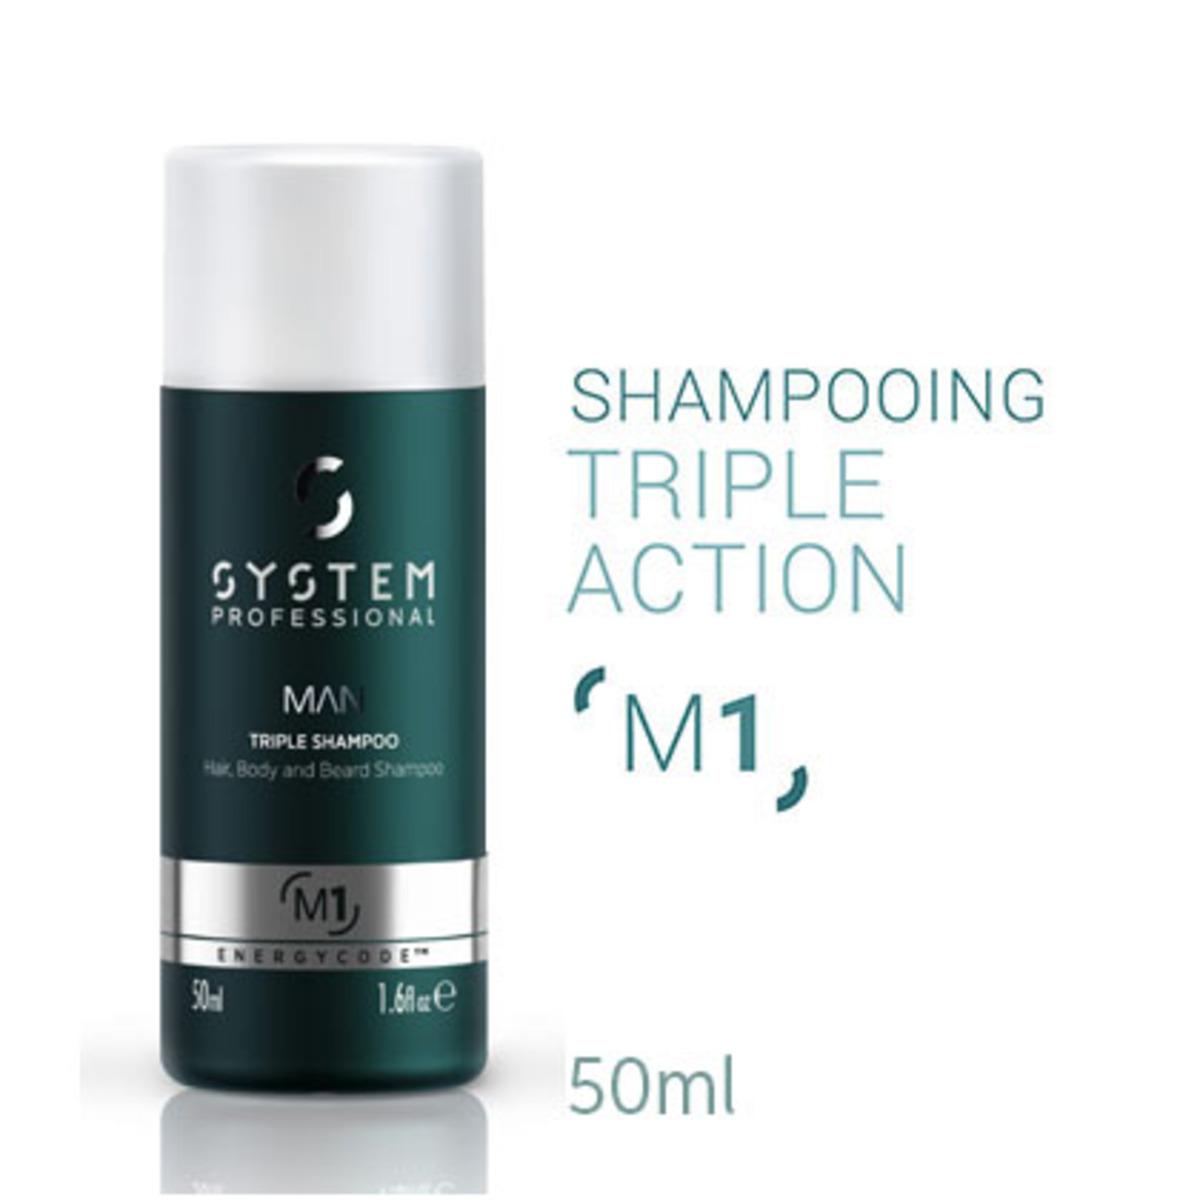 Shampoing triple usage cheveux, corps et barbe